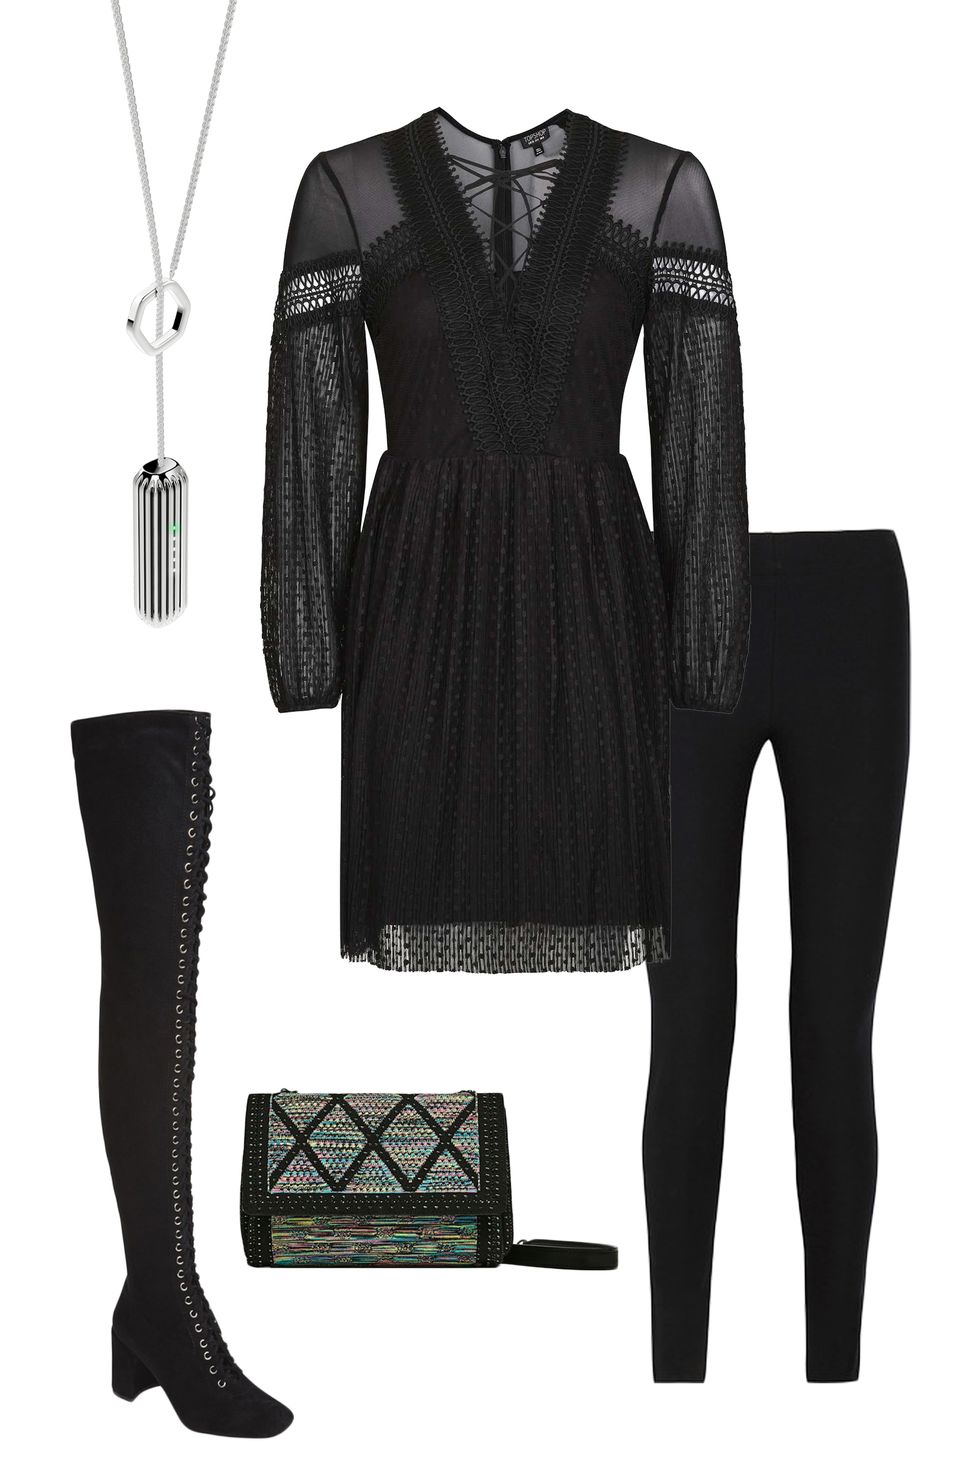 <p>All-black is always chic&nbsp;and ultra flattering. Treat leggings like tights and layer them under a sheer peasant dress. To up the bohemian appeal, pull on thigh-high boots and finish with eye-catching accessories like a patterned clutch and gleaming silver Fitbit lariat.</p><p><em data-redactor-tag="em" data-verified="redactor">Fitbit Flex 2, $100&nbsp;and Stainless Steel Pendant Accessory, $80, <a href="https://www.fitbit.com/shop/accessories/flex2-pendant" target="_blank" data-tracking-id="recirc-text-link">fitbit.com</a>; TopShop Spot Pleated Skater Dress, $85, <a href="http://us.topshop.com/webapp/wcs/stores/servlet/ProductDisplay?searchTermScope=3&amp;searchType=ALL&amp;viewAllFlag=false&amp;CE3_ENDECA_PRODUCT_ROLLUP_ENABLED=N&amp;catalogId=33060&amp;productOnlyCount=1&amp;sort_field=Relevance&amp;storeId=13052&amp;qubitRefinements=siteId%3DTopShopUS&amp;langId=-1&amp;beginIndex=1&amp;productId=26940940&amp;pageSize=20&amp;defaultGridLayout=3&amp;searchTerm=TS10E01LBLK&amp;productIdentifierproduct=product&amp;DM_PersistentCookieCreated=true&amp;searchTermOperator=LIKE&amp;x=25&amp;geoip=search&amp;y=11" target="_blank" data-tracking-id="recirc-text-link">topshop.com</a>;&nbsp;Helmut Lang Stretch-Twill Leggings, $119,&nbsp;<a href="https://www.theoutnet.com/en-US/Shop/Product/Helmut-Lang/Stretch-twill-leggings/766860" target="_blank" data-tracking-id="recirc-text-link">theoutnet.com</a><span class="redactor-invisible-space" data-verified="redactor" data-redactor-tag="span" data-redactor-class="redactor-invisible-space"></span>; Zara Contrast Fabric Crossbody Bag, $50,&nbsp;<a href="http://www.zara.com/us/en/woman/bags/view-all/contrast-fabric-crossbody-bag-c819022p4065559.html" target="_blank" data-tracking-id="recirc-text-link">zara.com</a>; Free People&nbsp;Laila Thigh High Boot, $228, </em><a href="https://www.freepeople.com/shop/laila-thigh-high-boot/?color=001&amp;cm_mmc=CA_PLAUS-_-Google+PLA-_-PLA-_-39070255&amp;source=PLA&amp;CAWELAID=120120800000651414&amp;source=PLA&amp;catargetid=120120800000335973&amp;cadevice=c&amp;gclid=CODv88-K4dECFcyLswodMbgH-Q" target="_blank" data-tracking-id="recirc-text-link"><em data-redactor-tag="em" data-verified="redactor">freepeople.com</em></a></p>